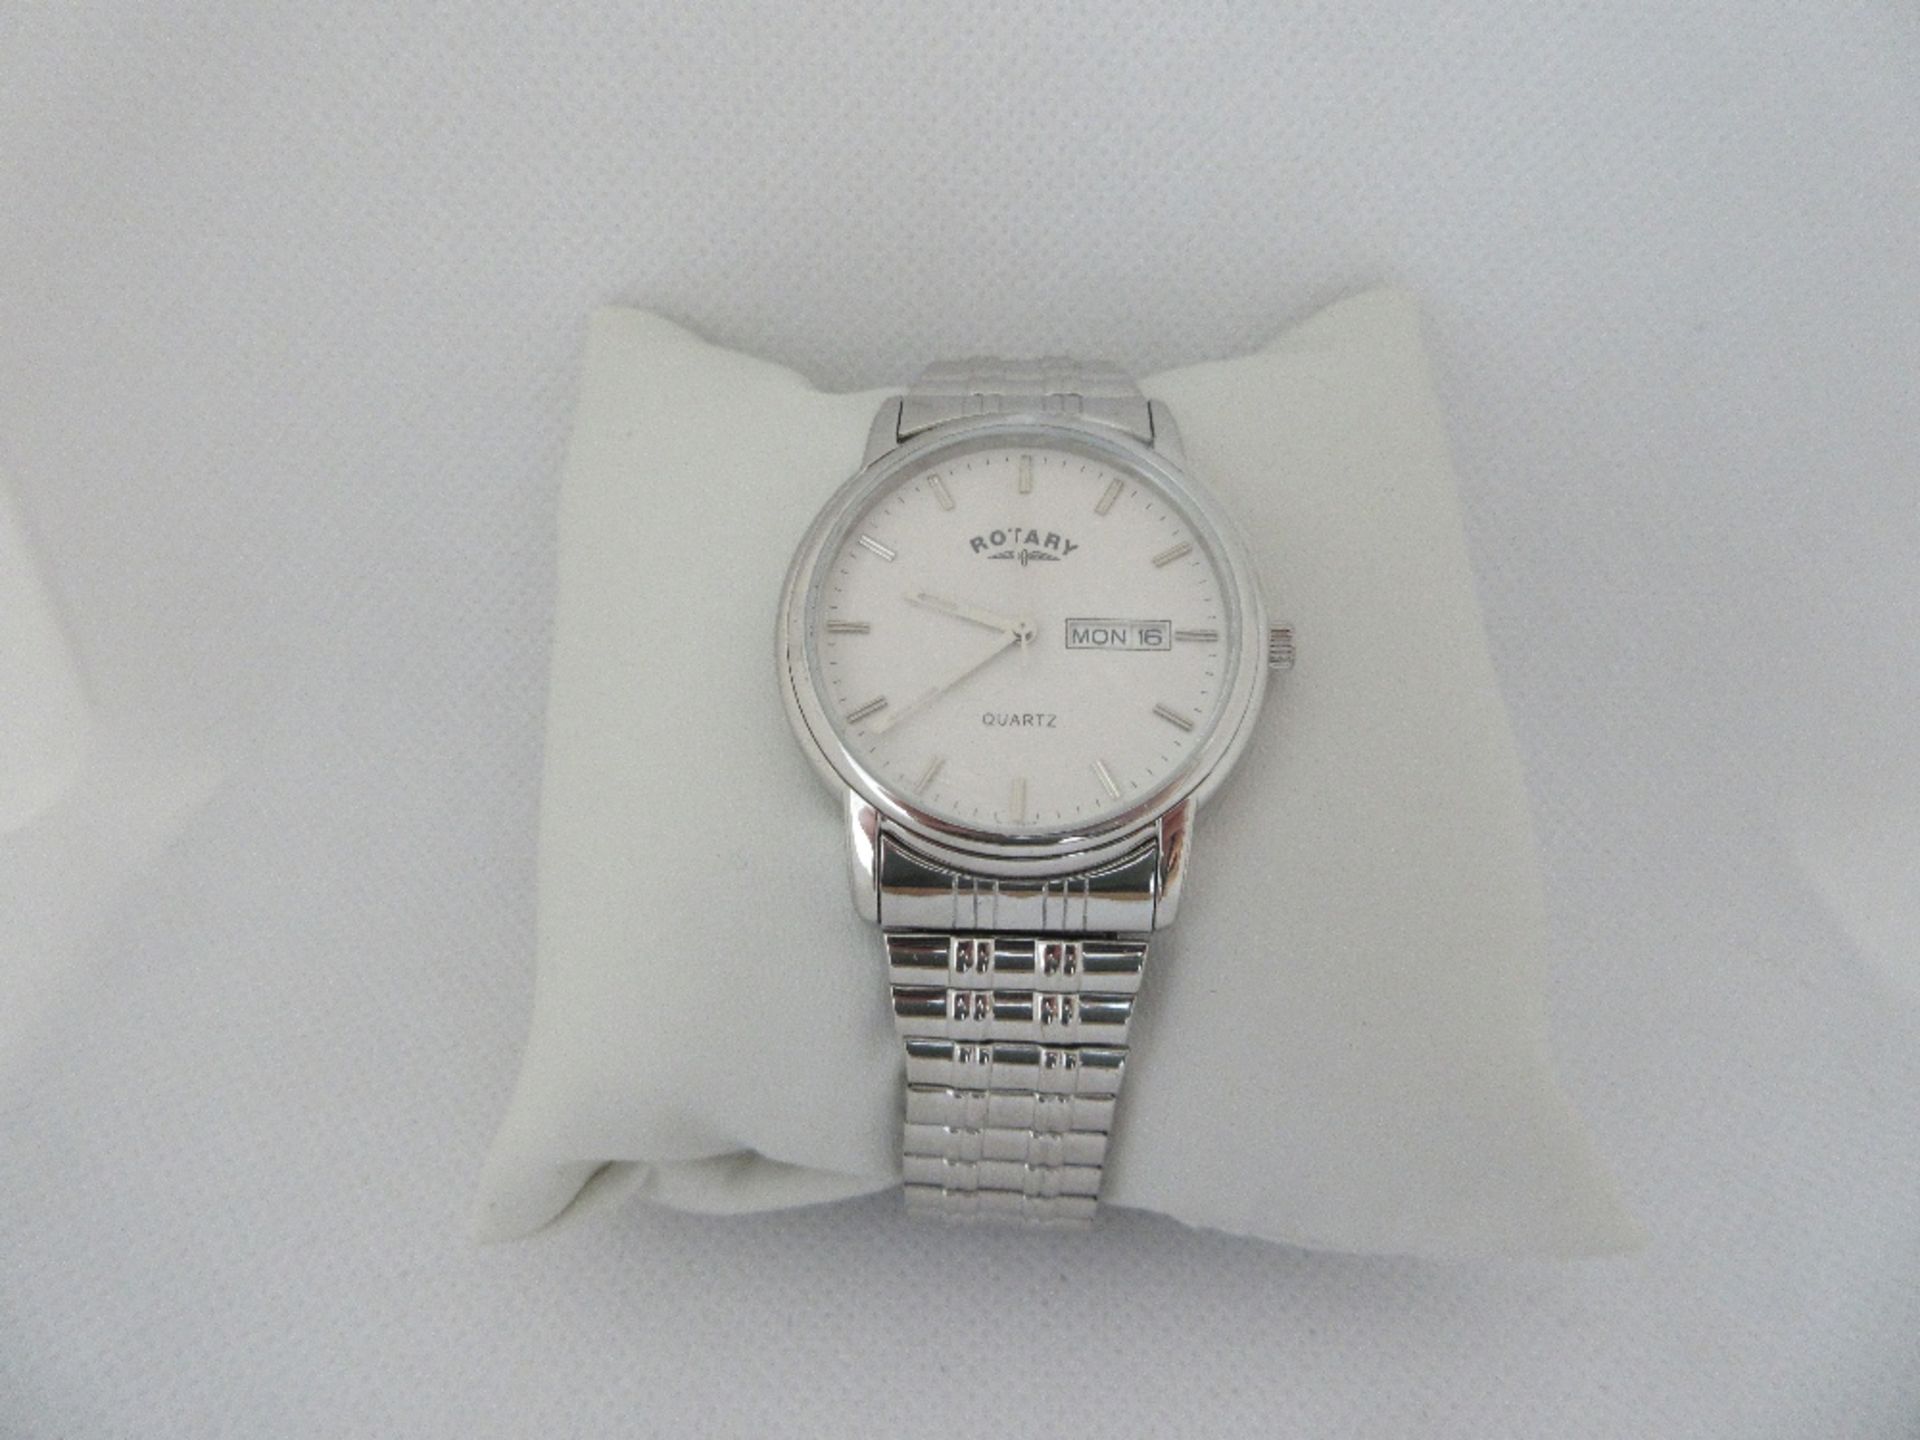 ROTARY MALE WATCH, MODEL GB102762/02, CASE DIAMETER 38MM, STAINLESS STEEL STRAP, BOXED, RRP £ 99 - Image 2 of 4